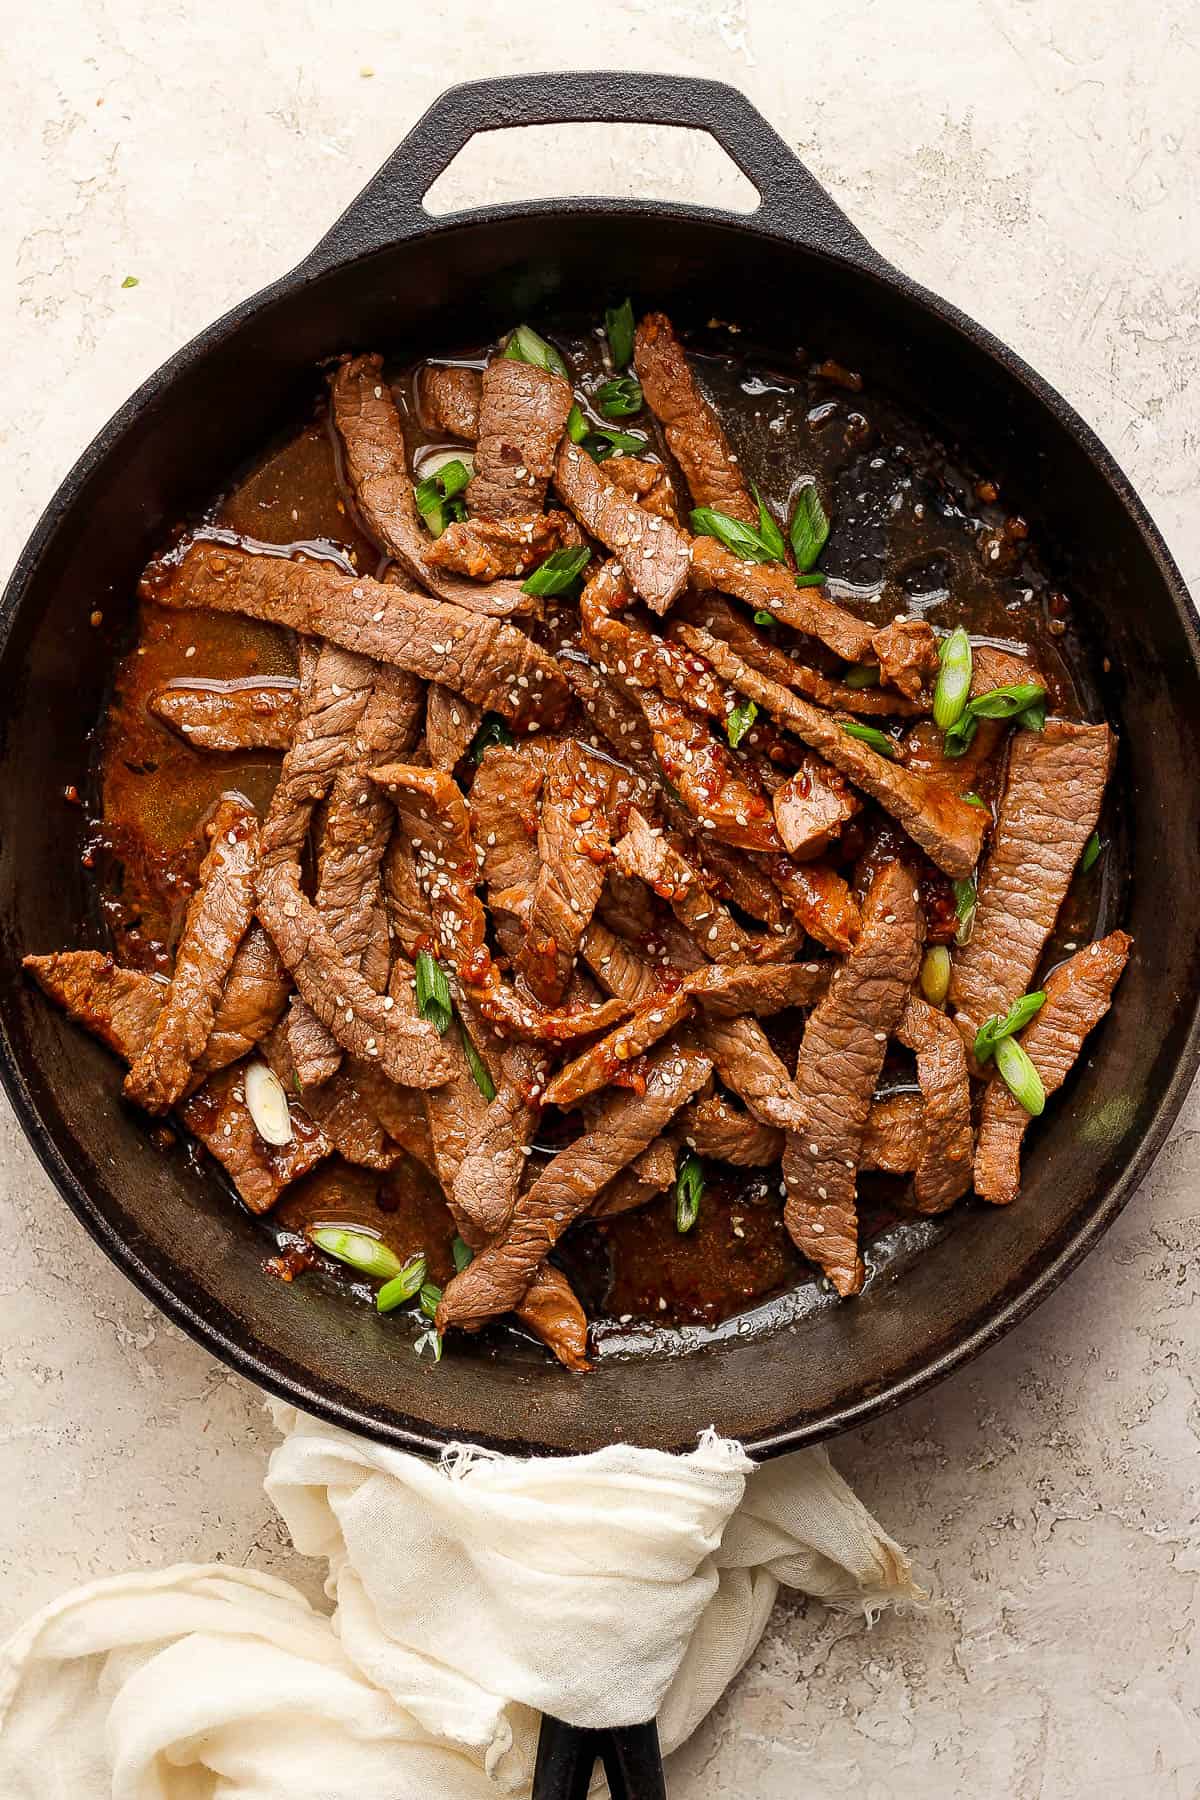 Beef bulgogi in a skillet topped with green onions.